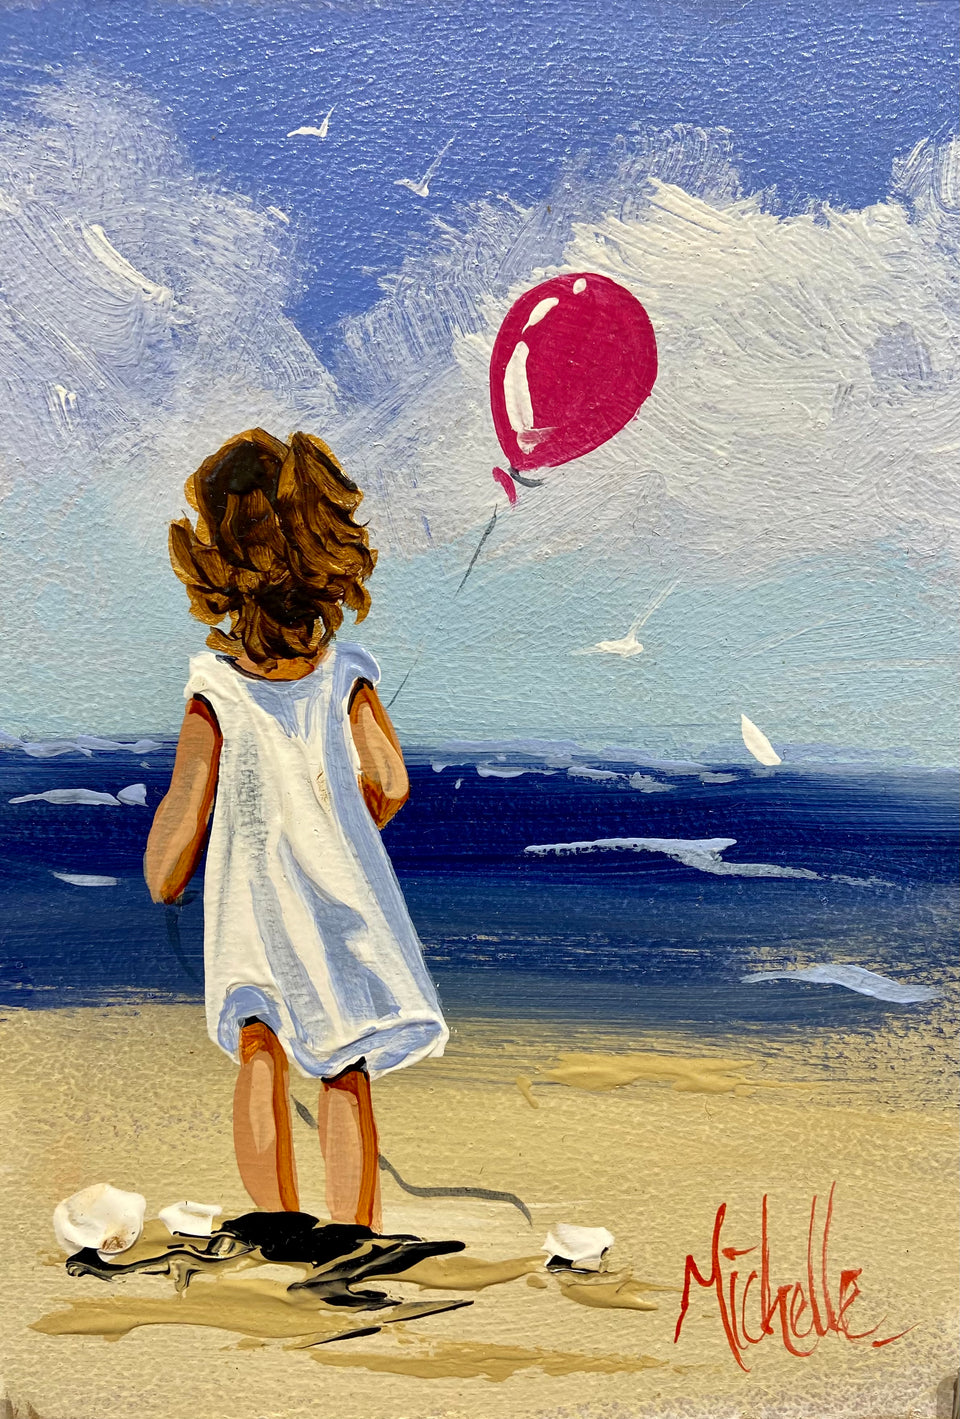 Young Girl With Balloon